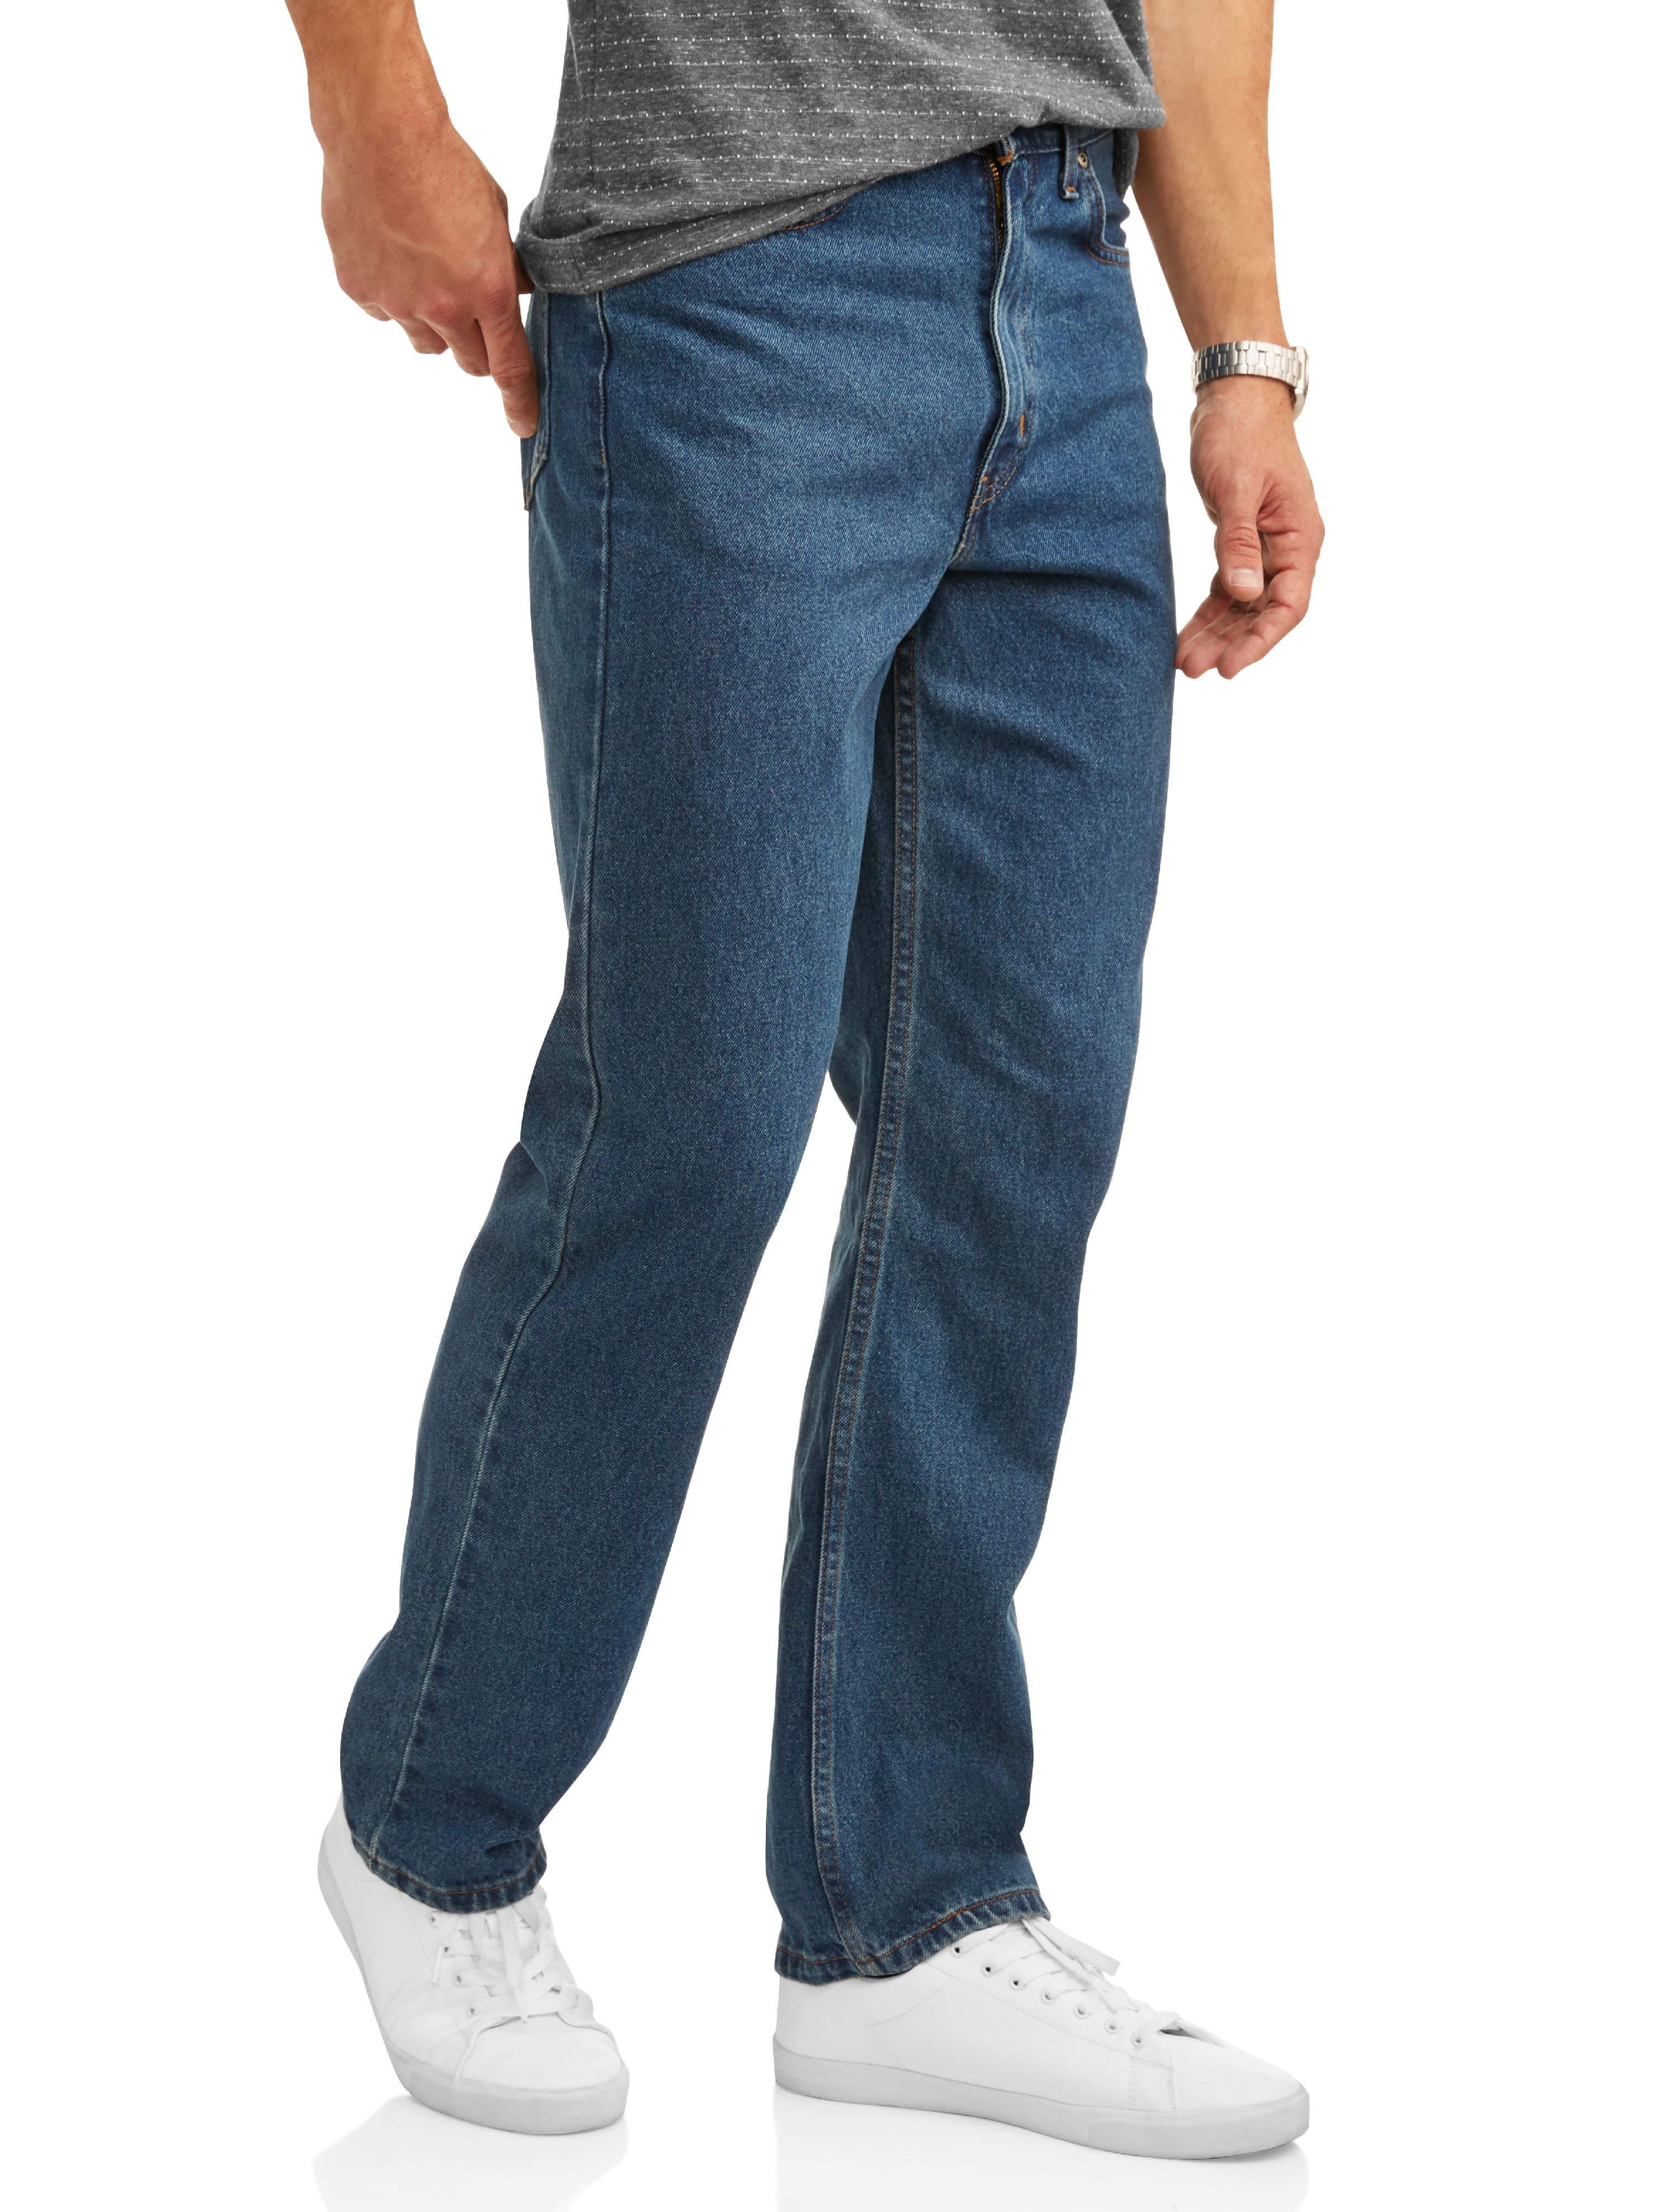 Men's Relaxed Fit Jeans - Denim for Men | 7 For All Mankind